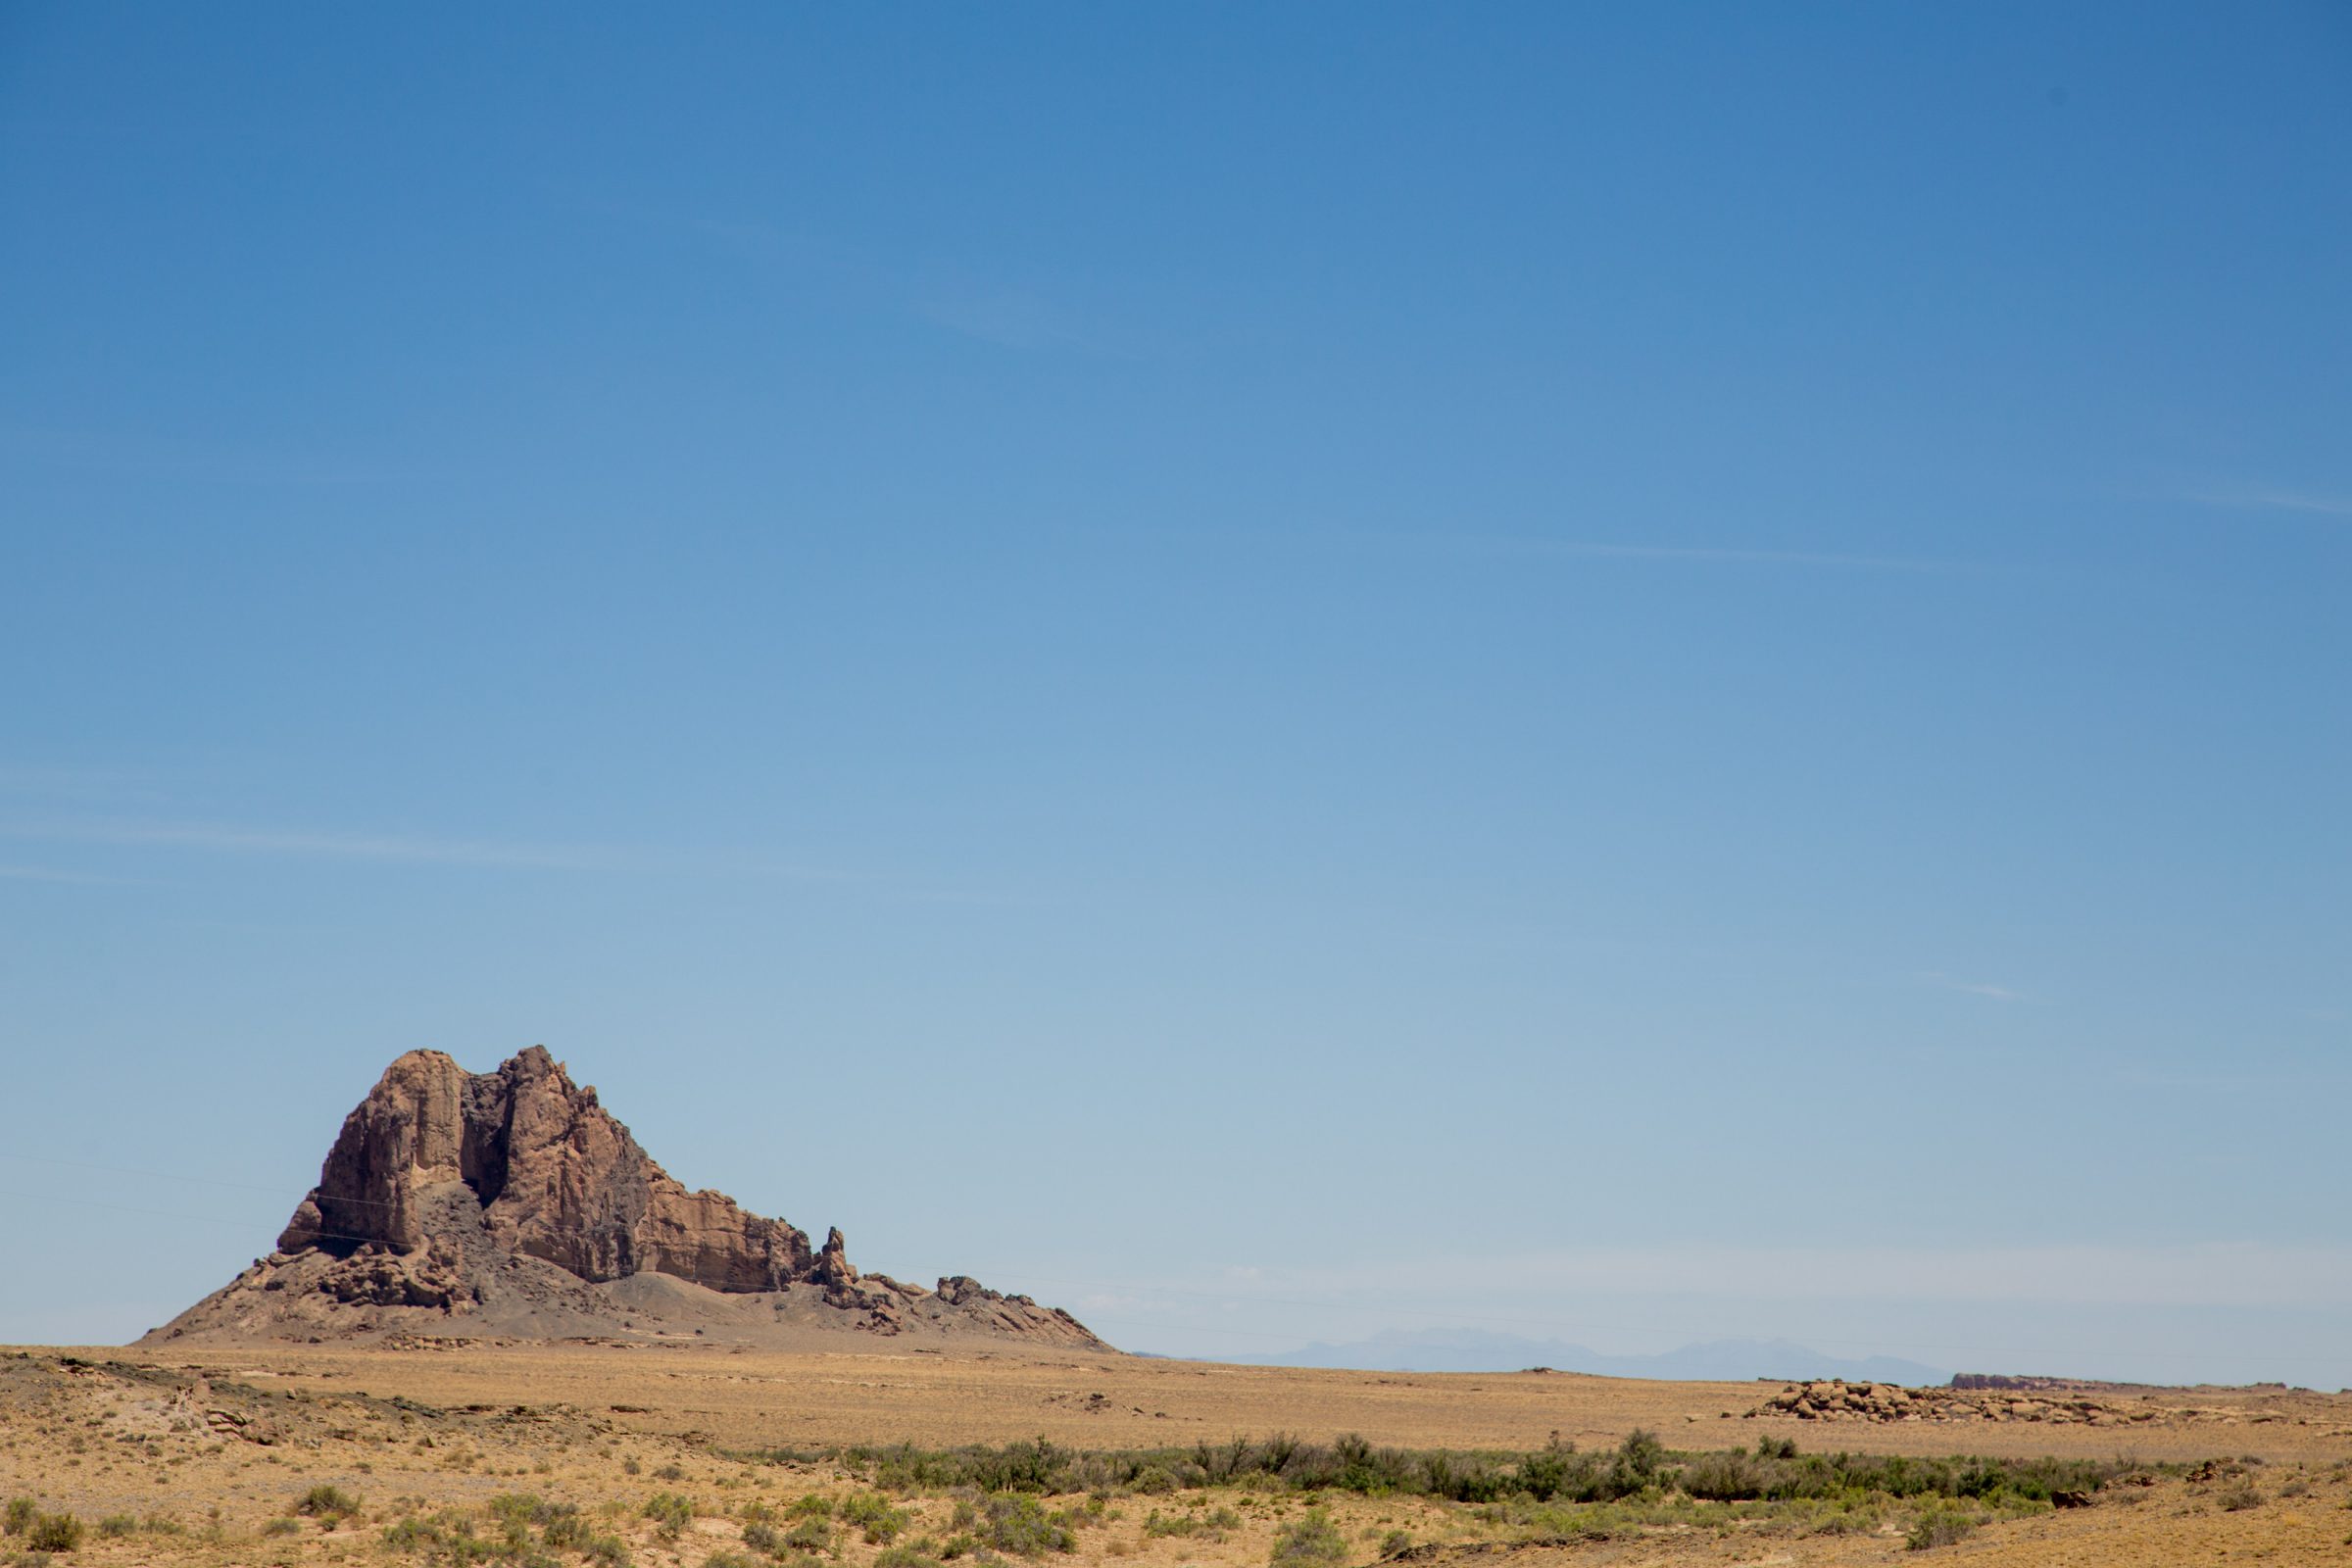 Landscape photo of desert in the foreground, with a rocky bluff off to the side.